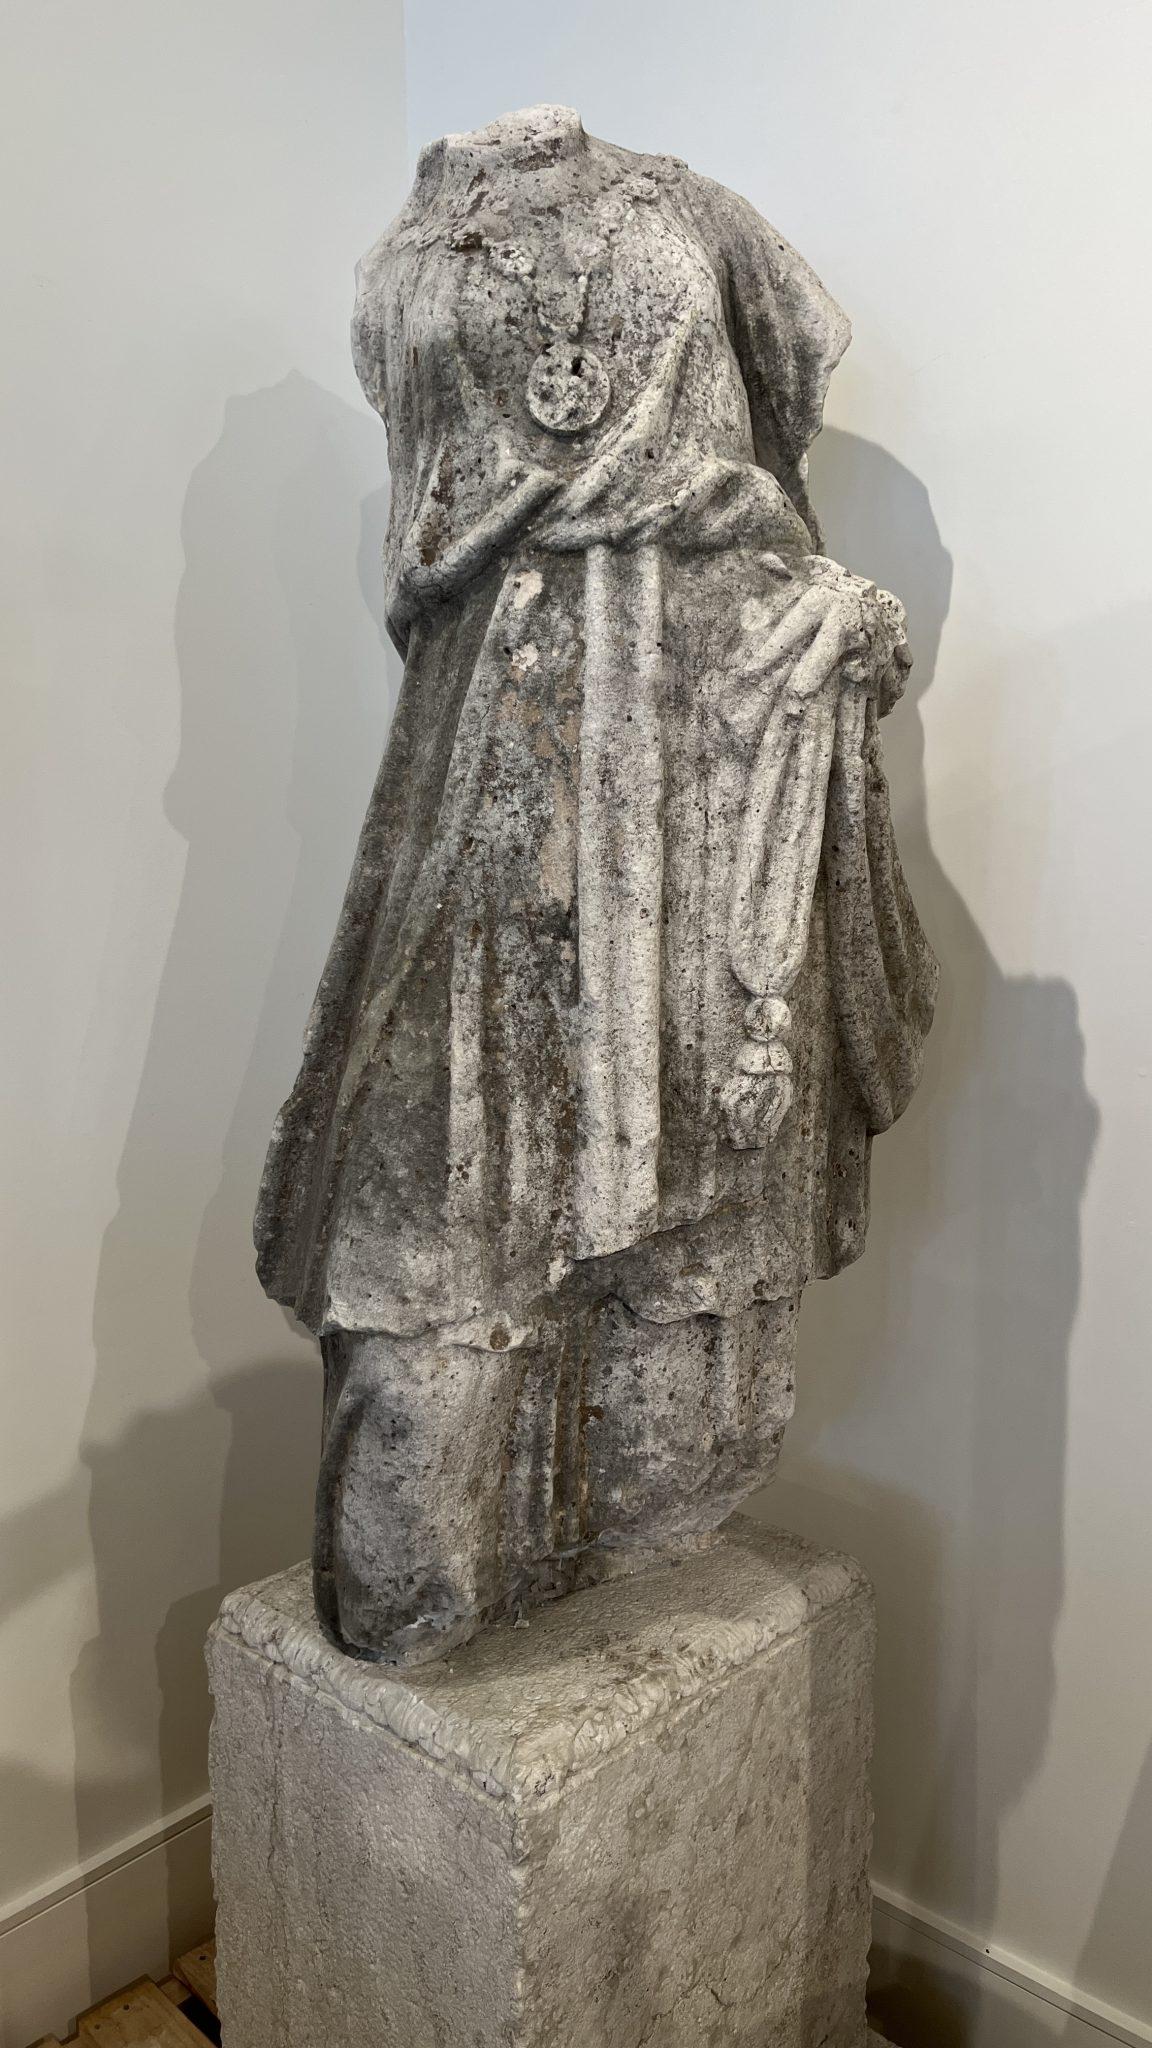 Romanesque sculpture is bold, dignified and gets our attention. This Neo-classic form is all that and more. This is a large female figure with a gentle S curve. Her tunic has beautiful draping and her left hand rests on a knot. The knot often